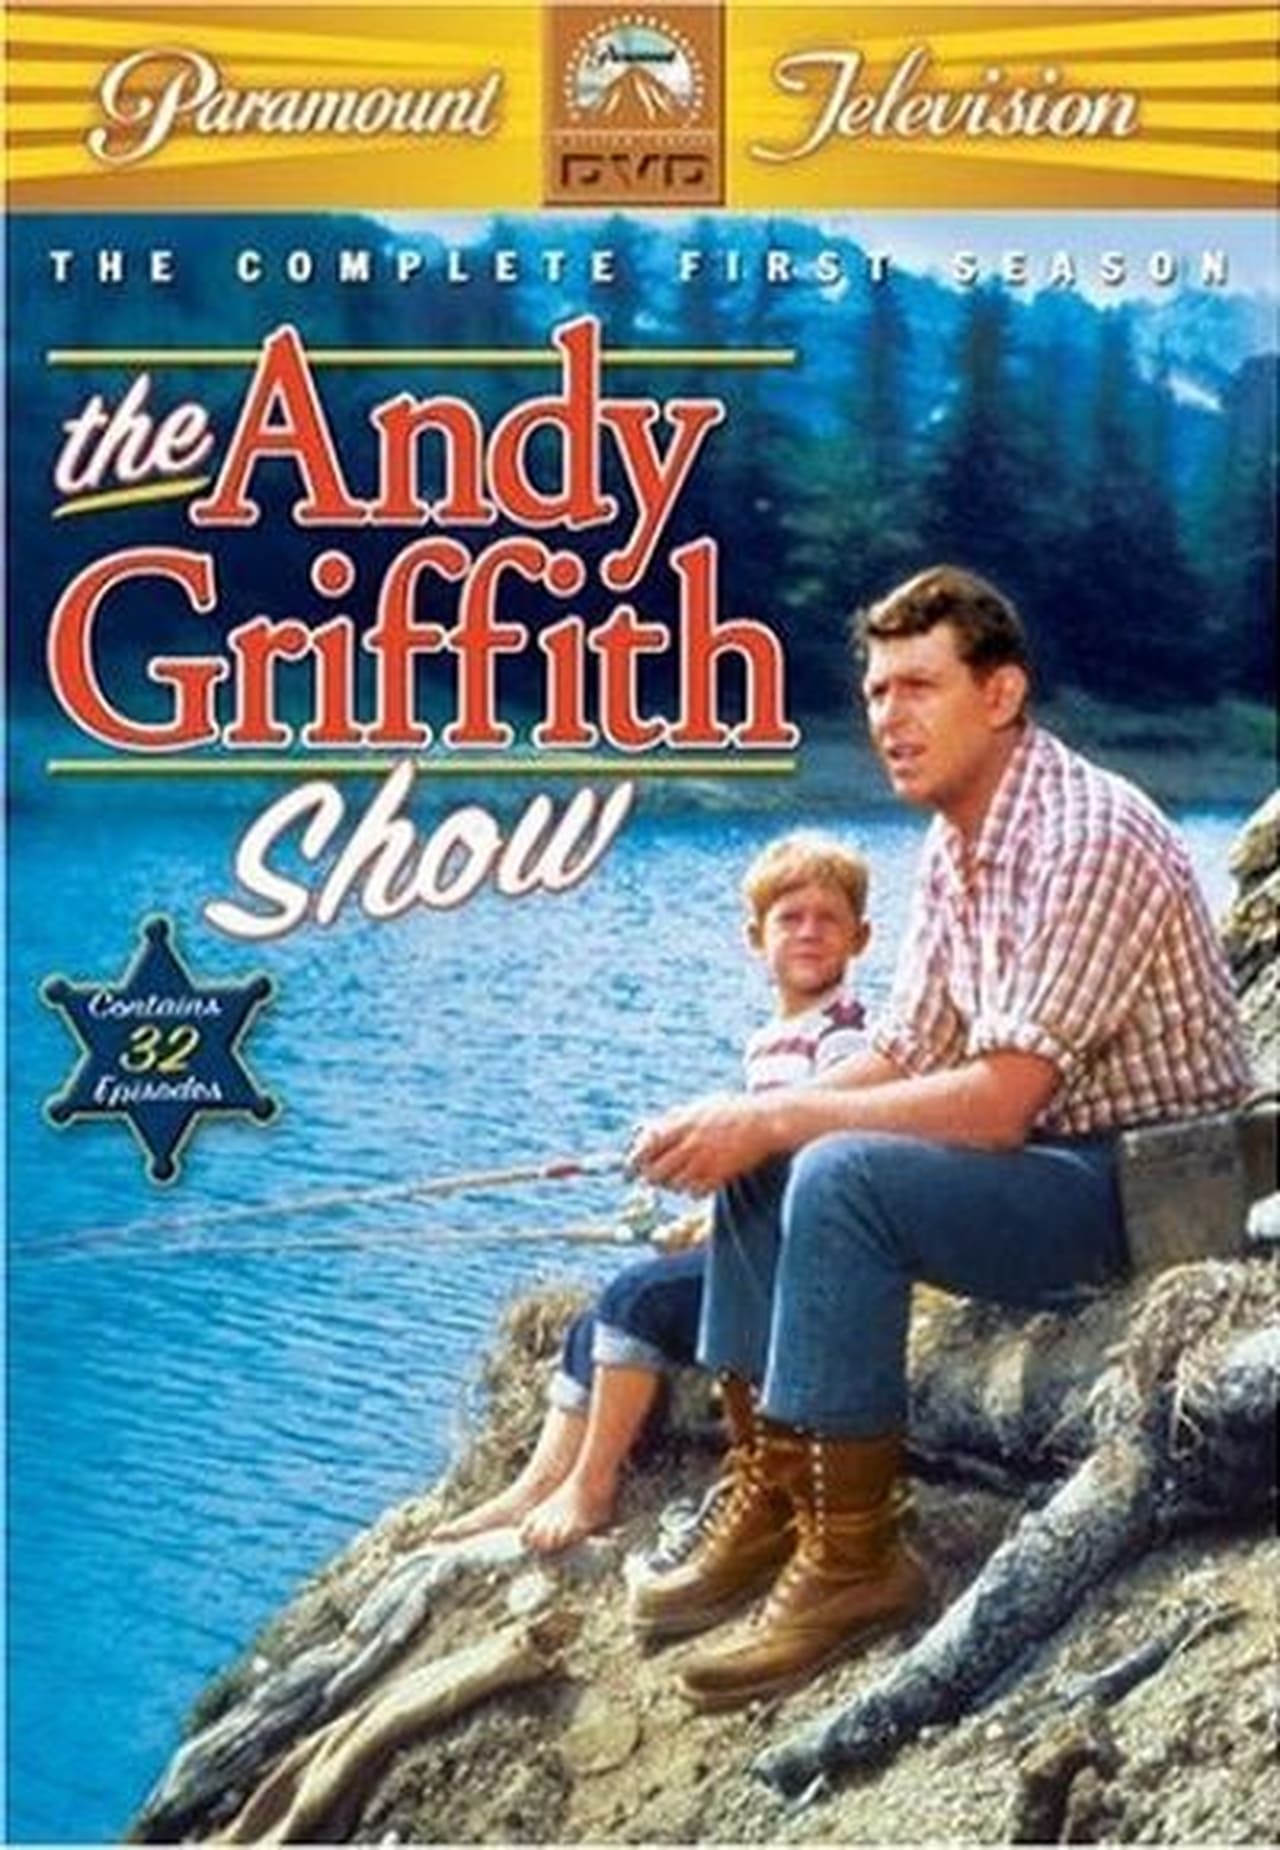 The Andy Griffith Show Season 1